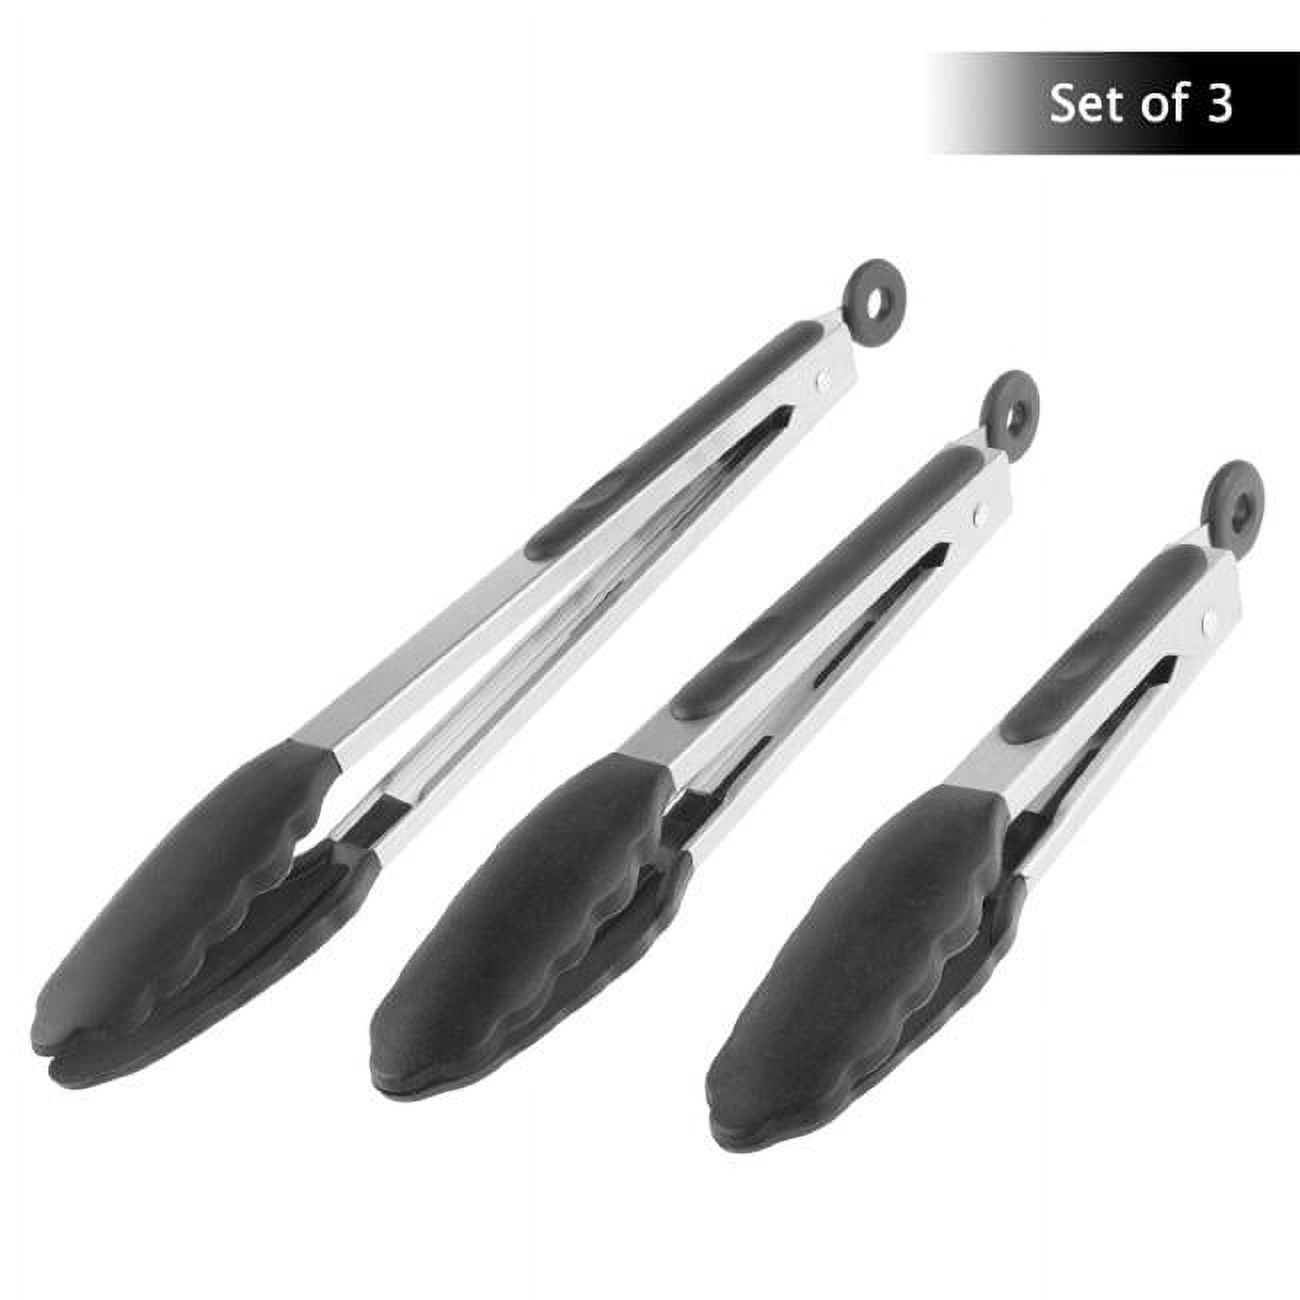 Classic Cuisine Set of 3 Stainless-Steel Kitchen Tongs with Silicone Tips - image 1 of 6